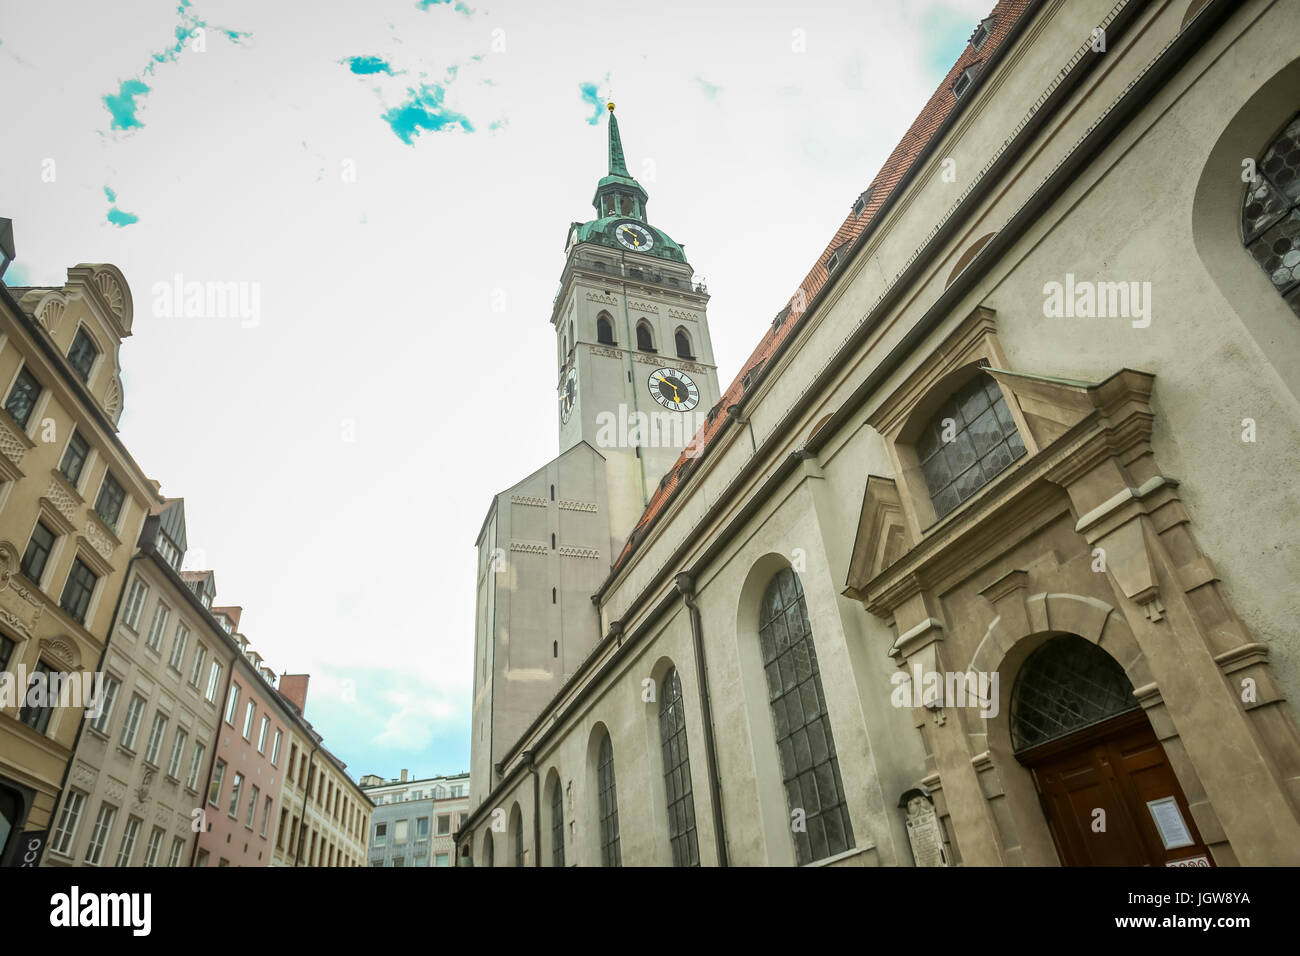 MUNICH, GERMANY - MAY 9, 2017 : A low angle view of the Saint Peters church clock tower among the city buildings in Munich, Germany. Stock Photo